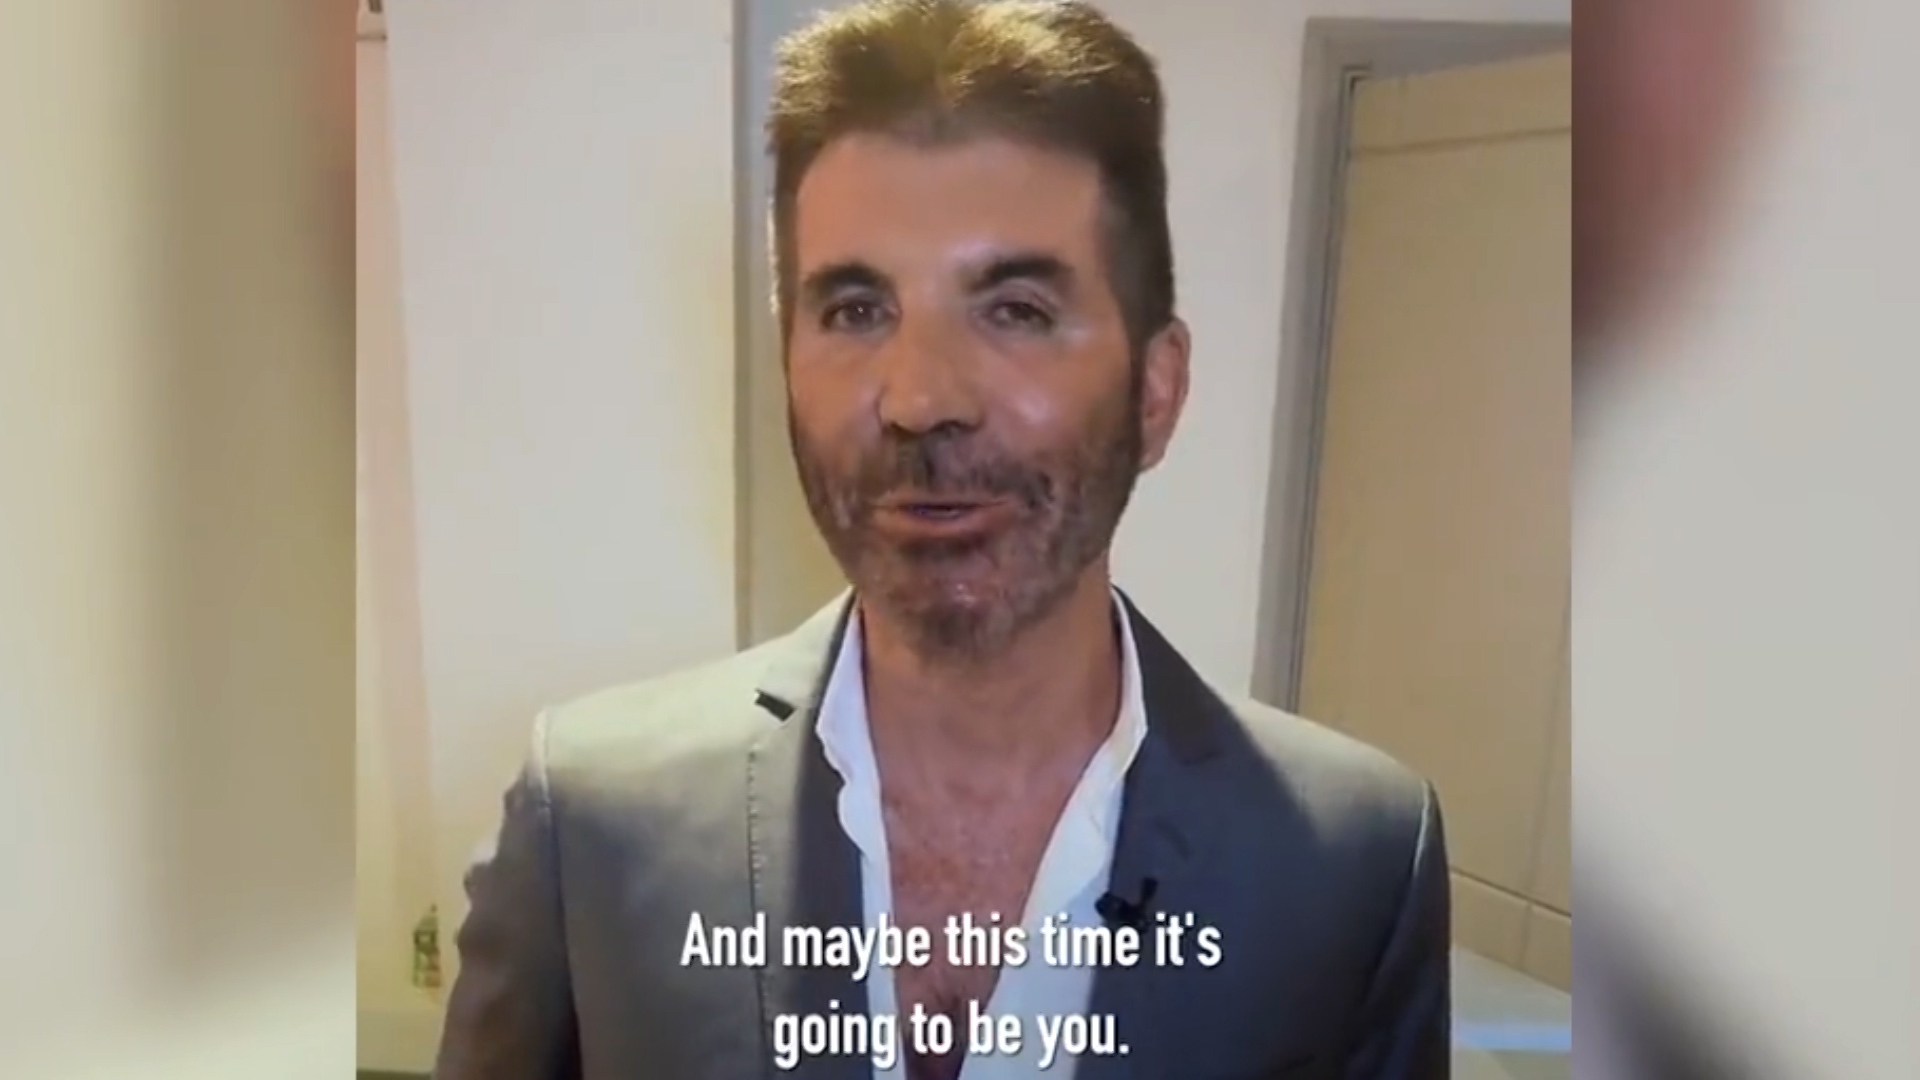 Simon Cowell looks like "Madame Tussauds waxwork" in latest video, gets trolled for appearance